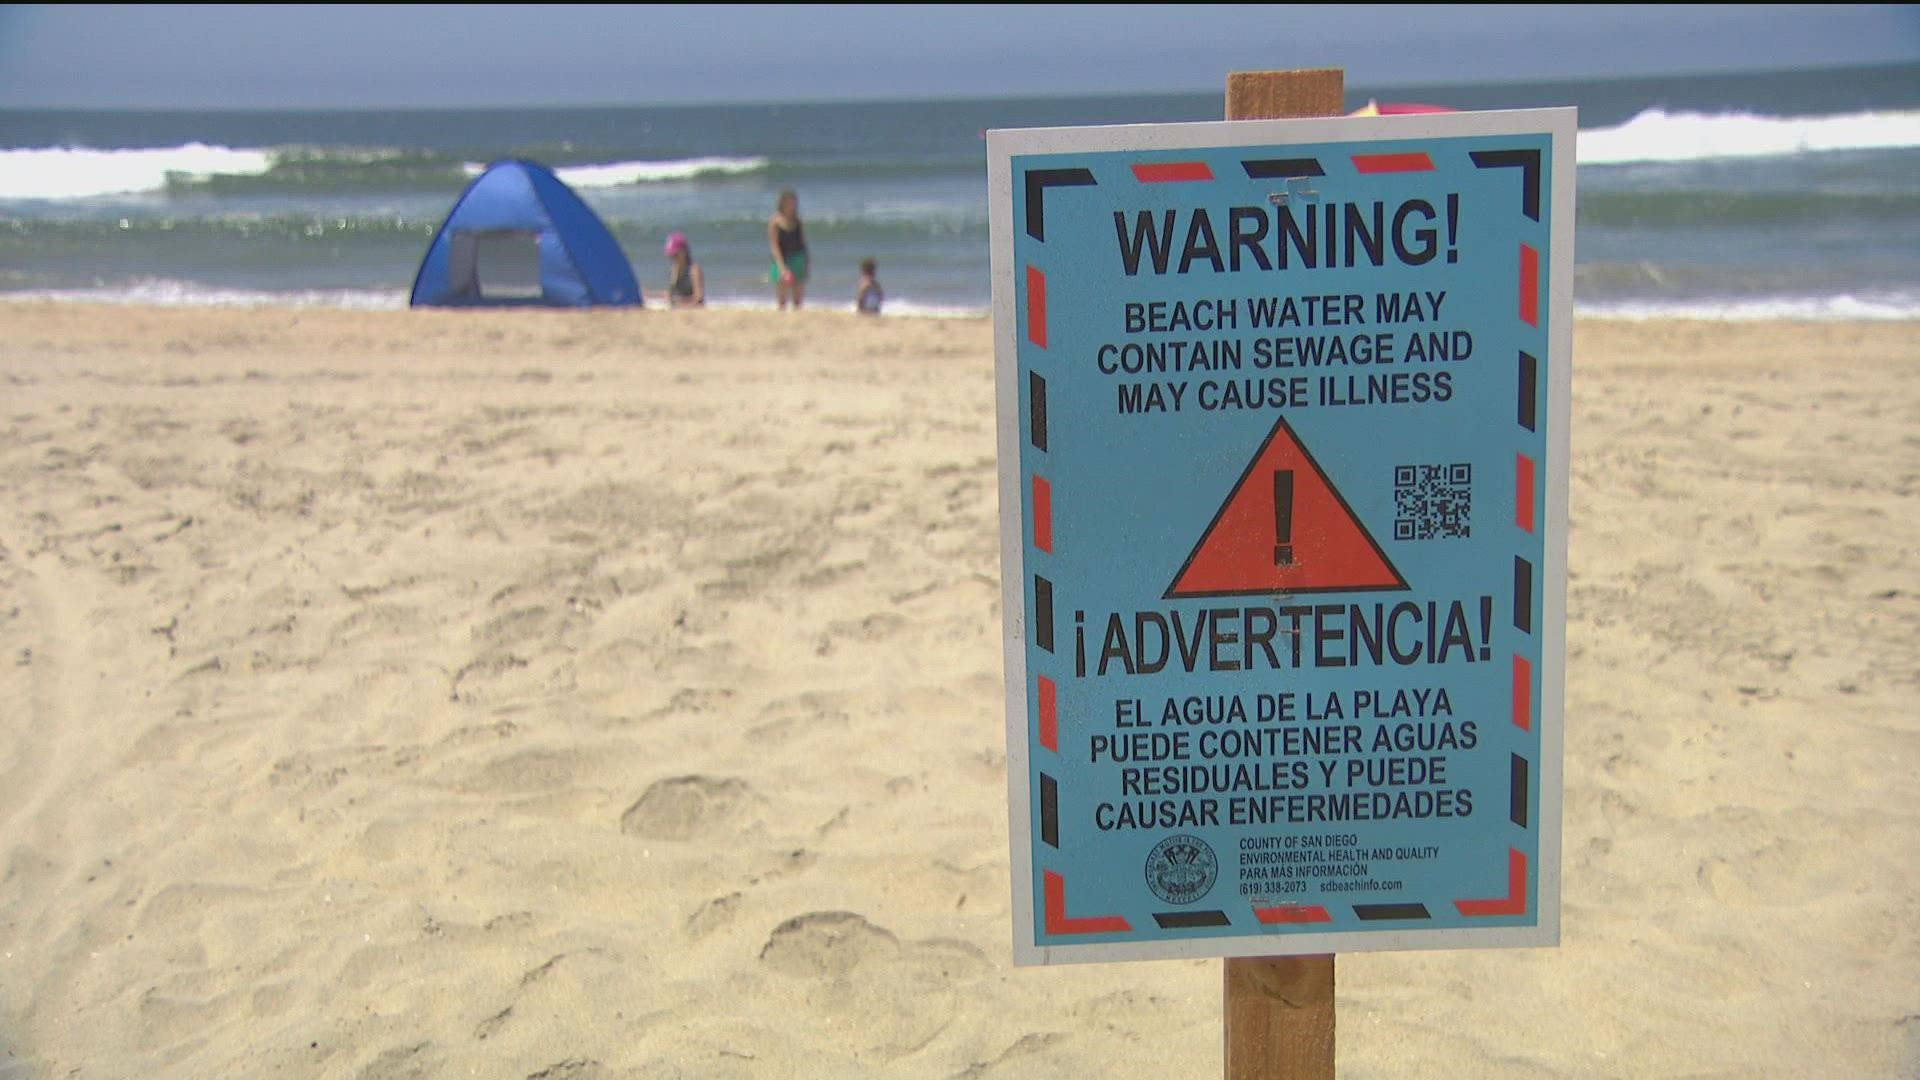 A reported 49 million gallons of sewage pushed north by a new south swell